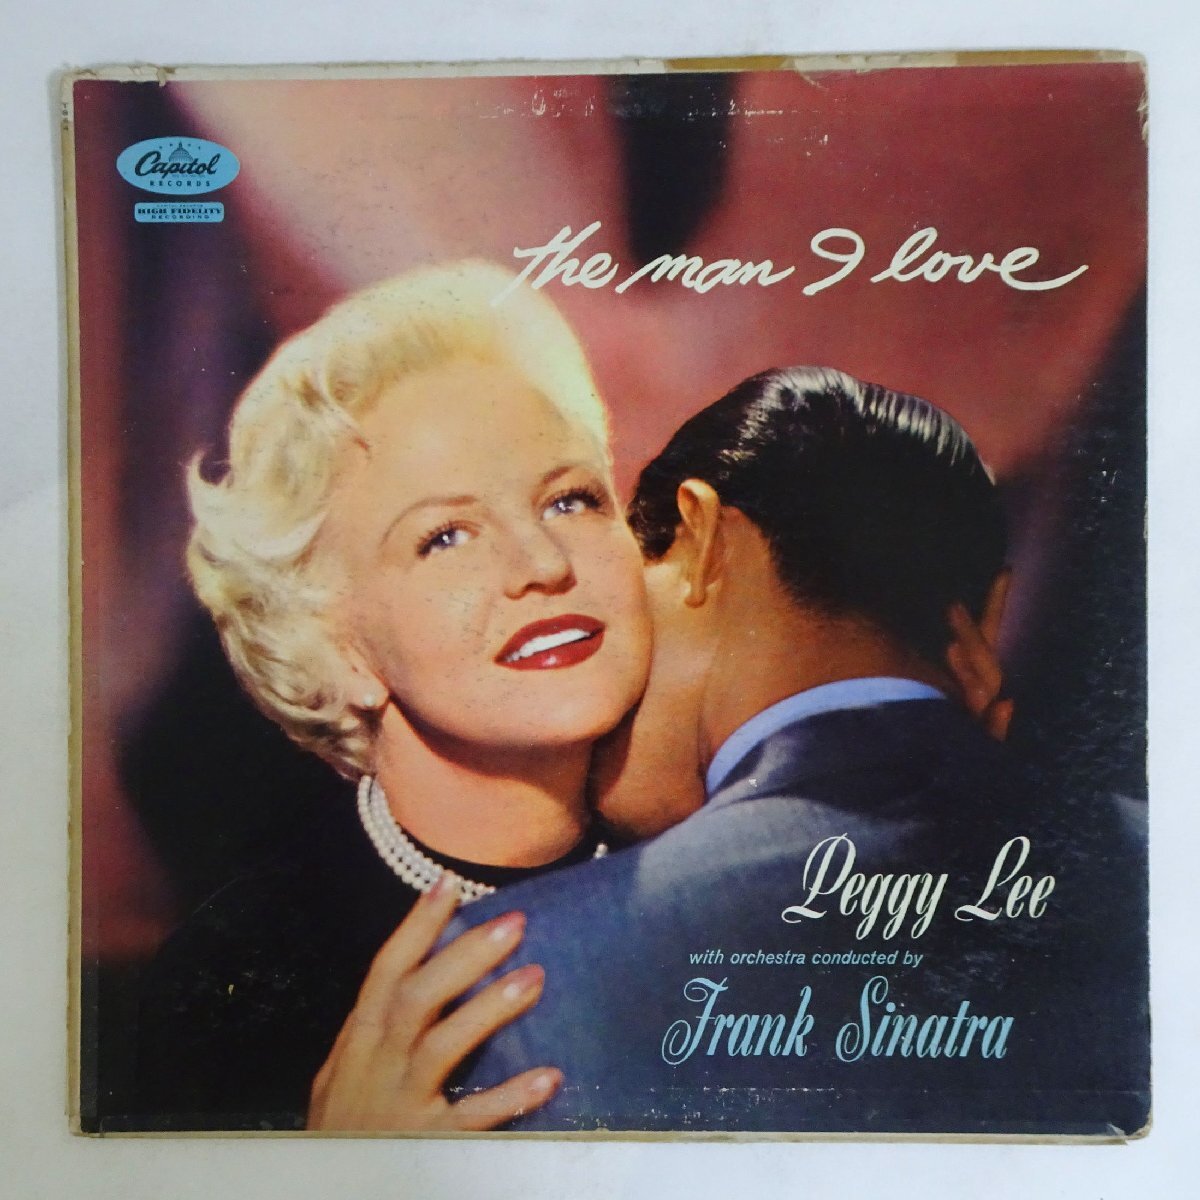 10026765;【US盤/ターコイズラベル/MONO/Capitol】Peggy Lee With Orchestra Conducted By Frank Sinatra / The Man I Love_画像1